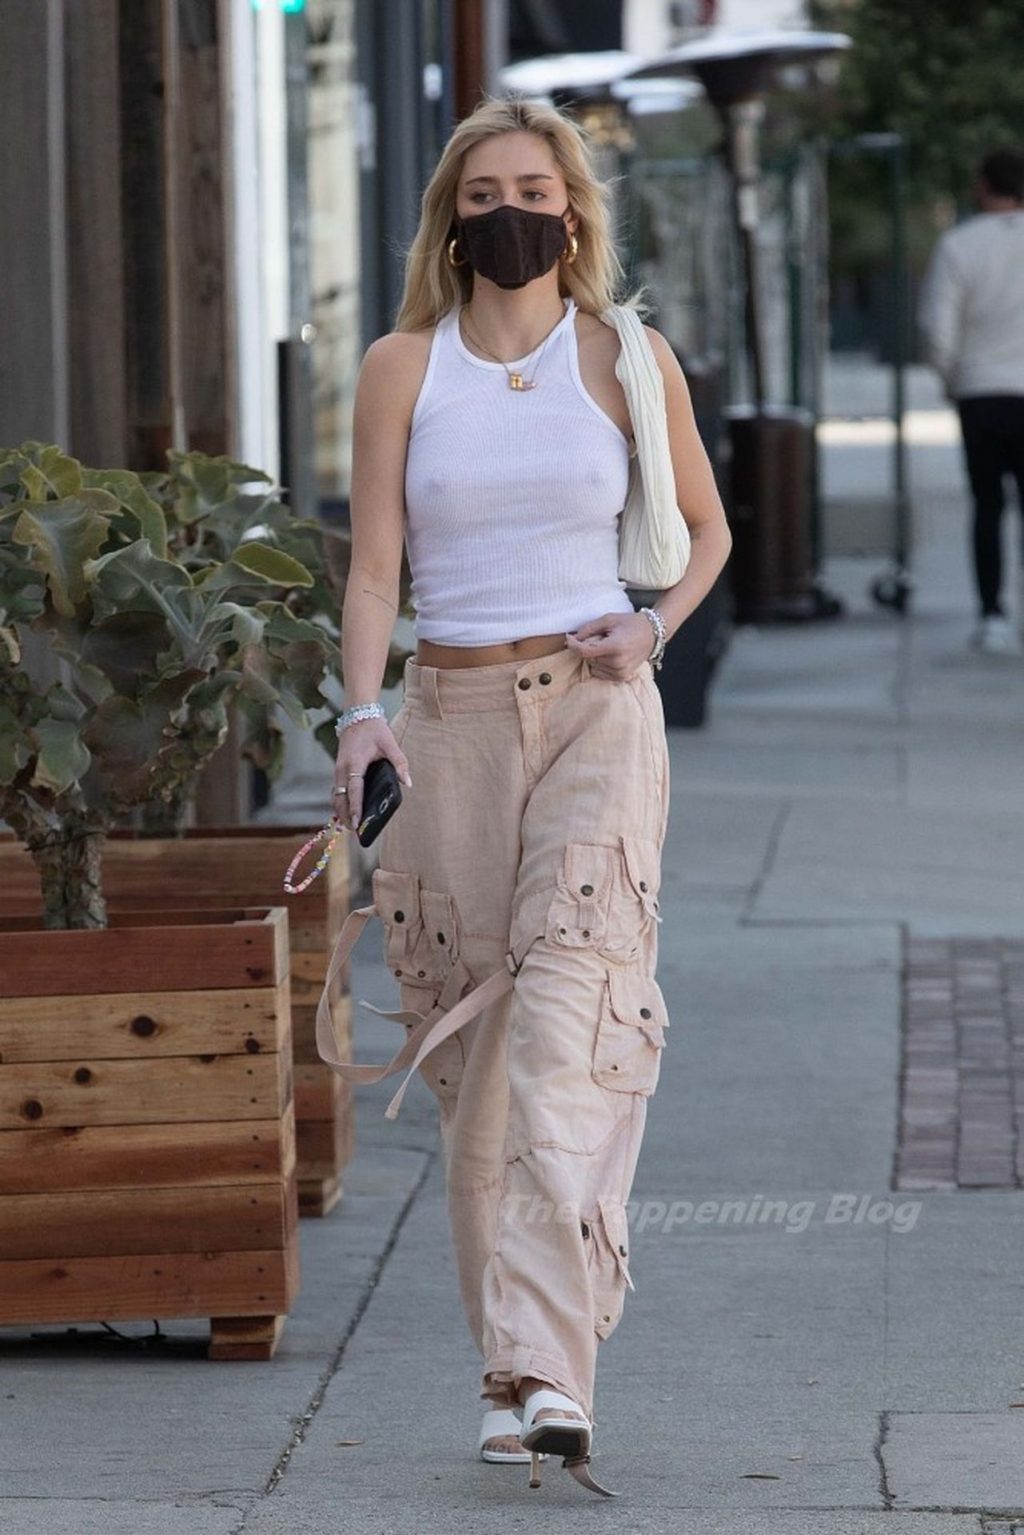 Braless Delilah Belle Hamlin Arrives at Lunch with Friends in LA (22 Photos)